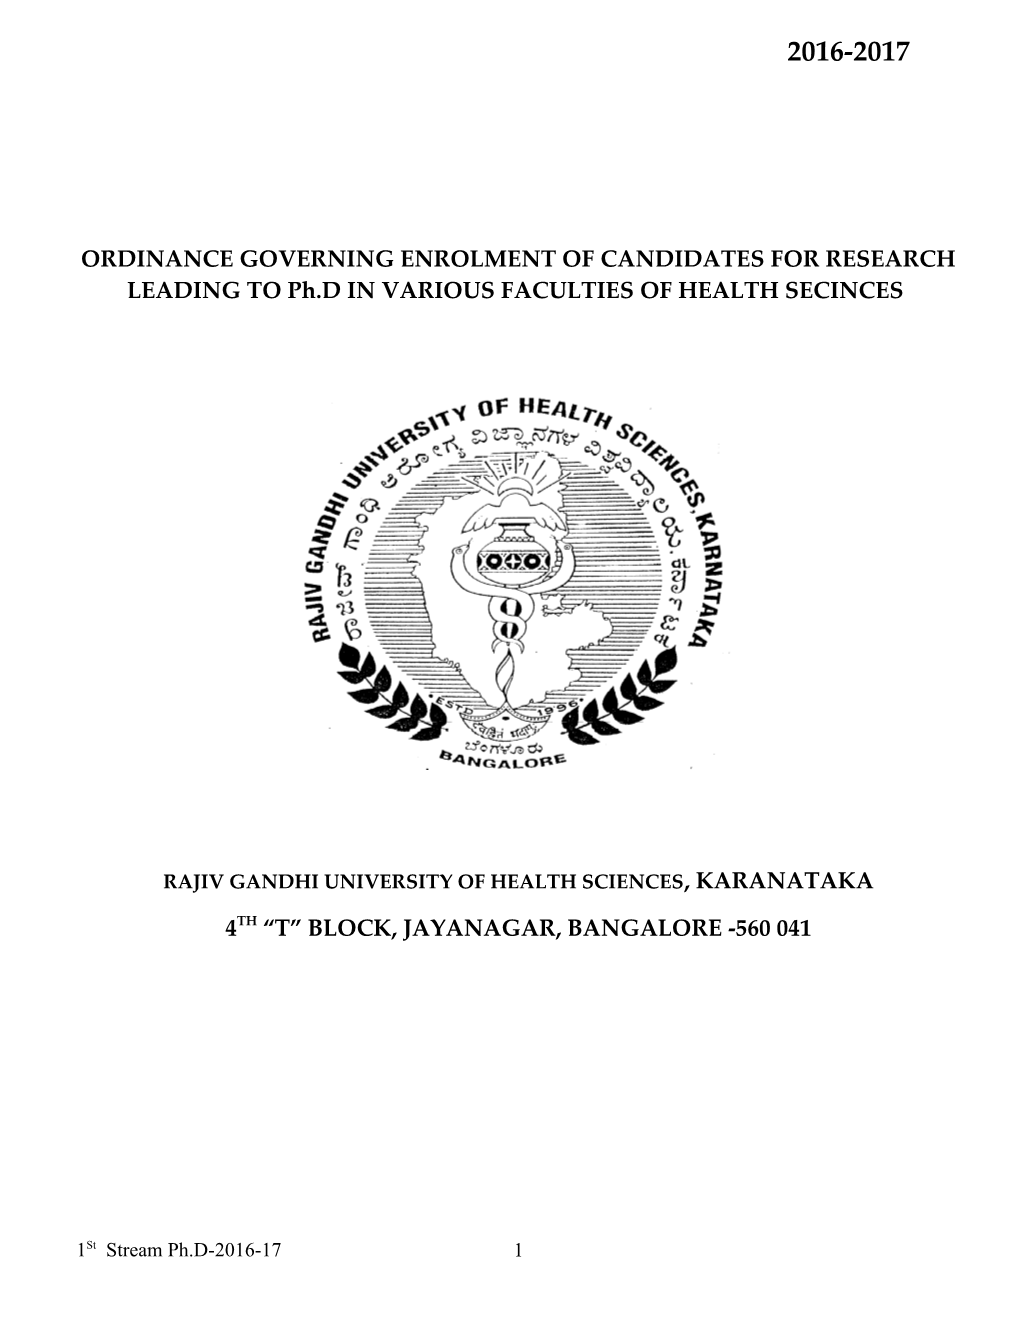 ORDINANCE GOVERNING ENROLMENT of CANDIDATES for RESEARCH LEADING to Ph.D in VARIOUS FACULTIES